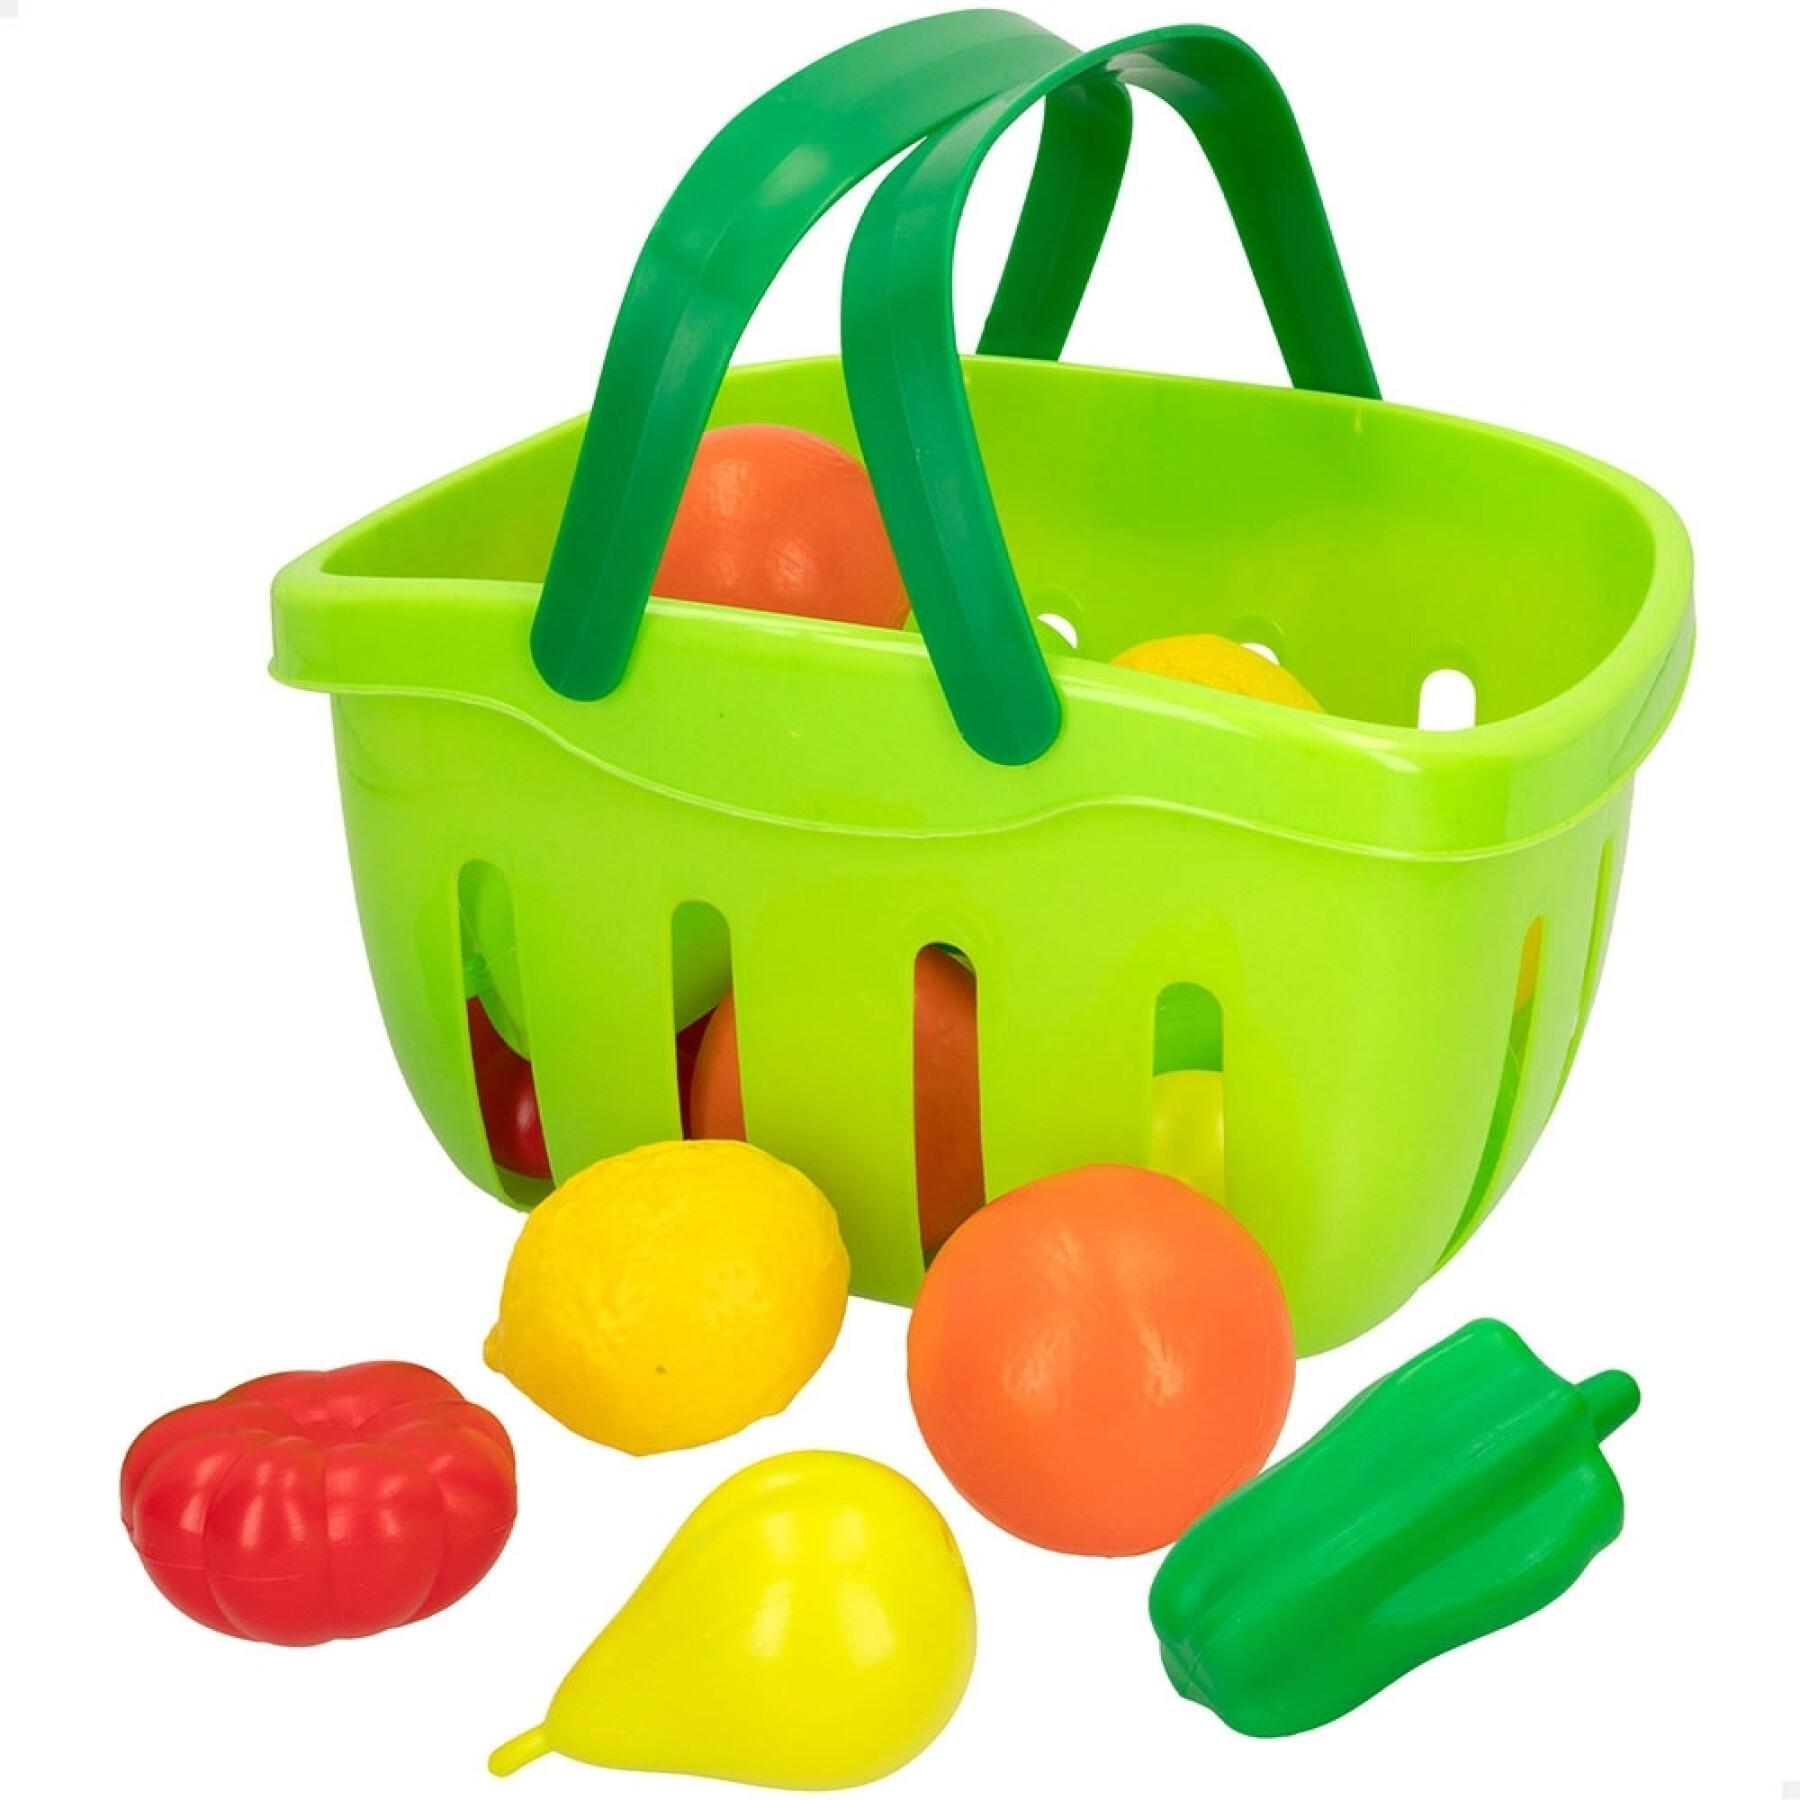 Fruit and vegetable basket parts CB Toys (x22)